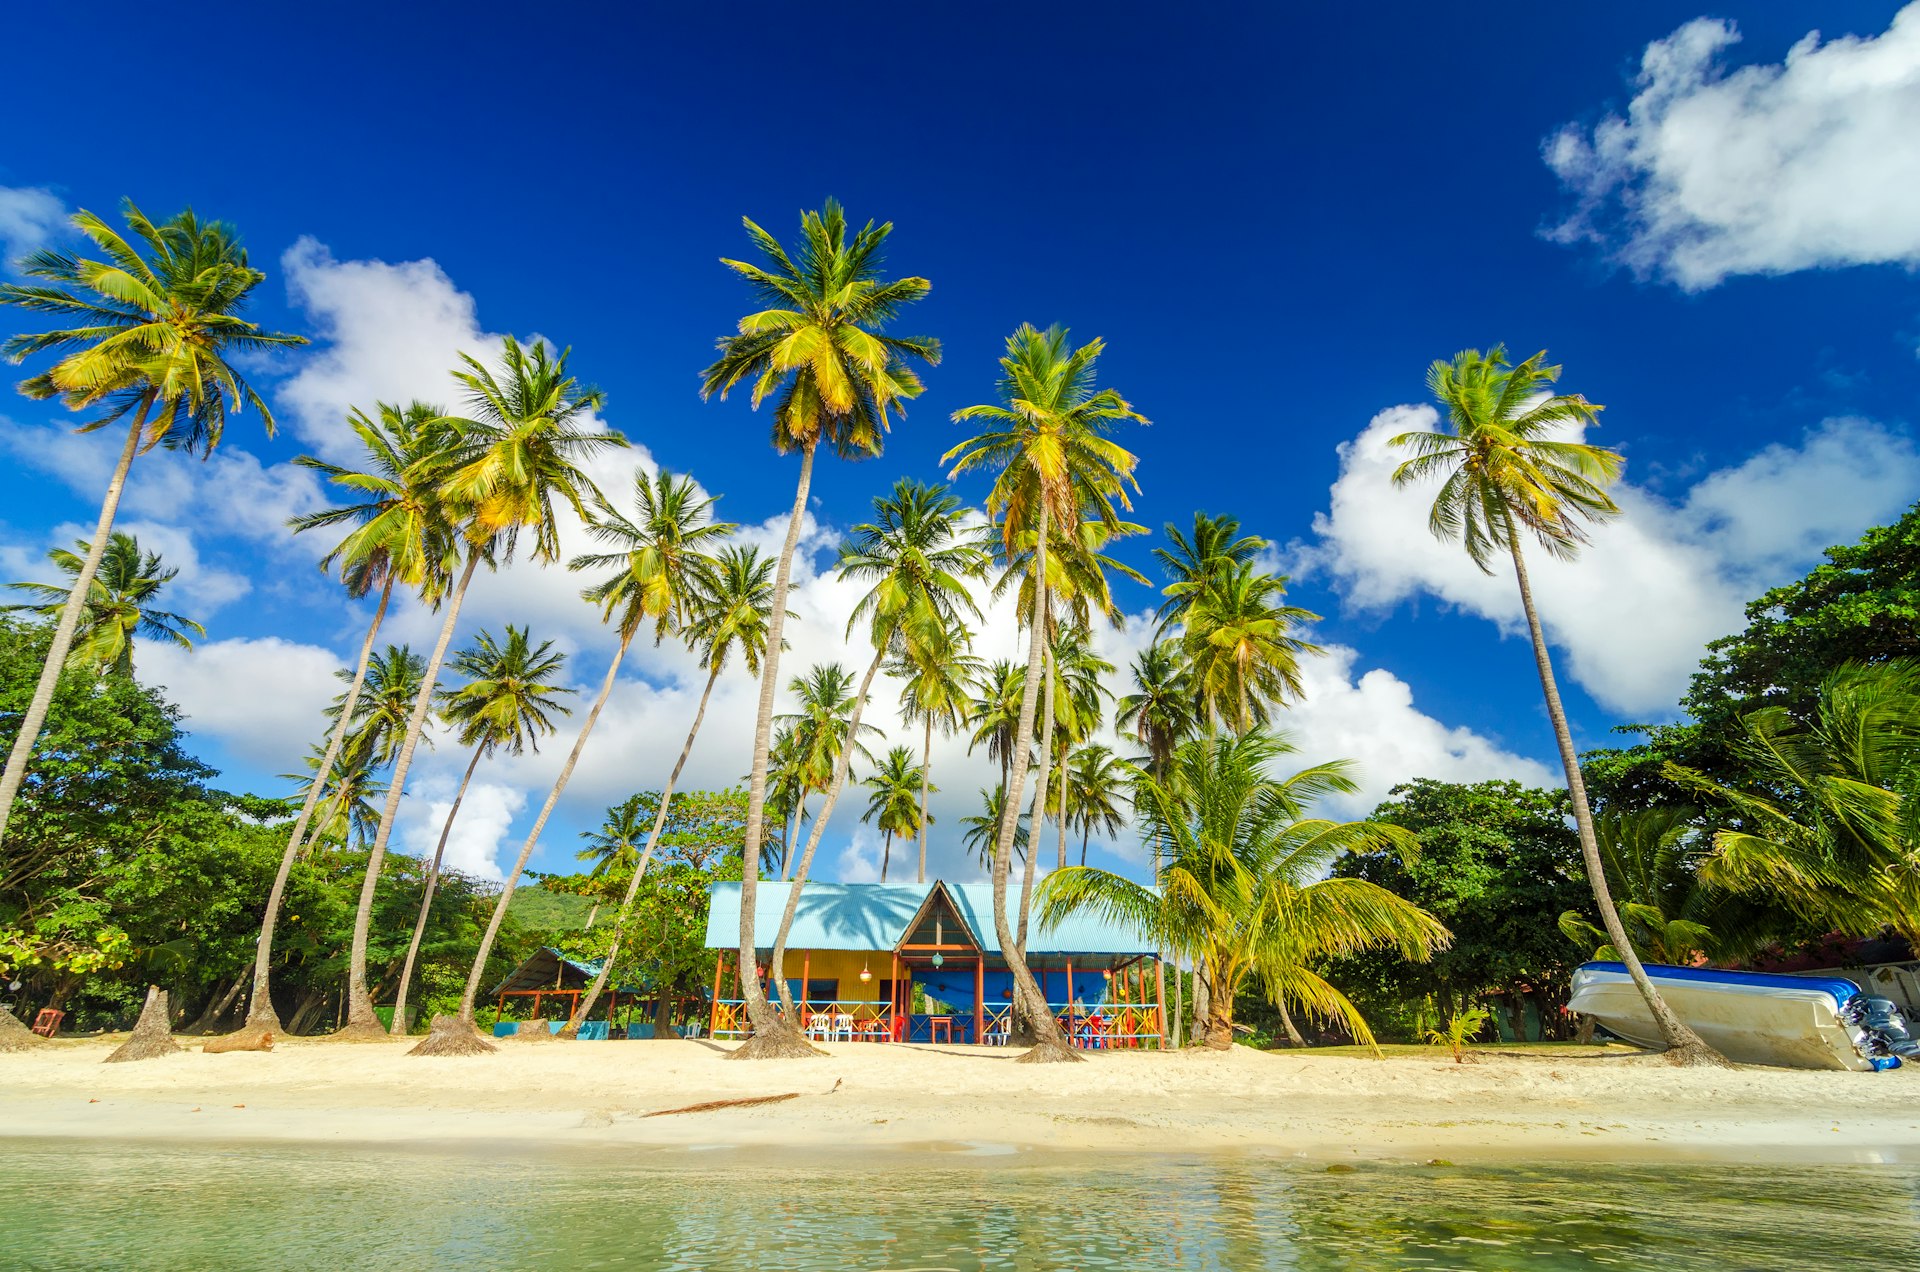 A tropical beachfront with a cluster of tall palm trees under a sunny blue sky with fluffy clouds, overlooking colorful beach huts and a tranquil sea.